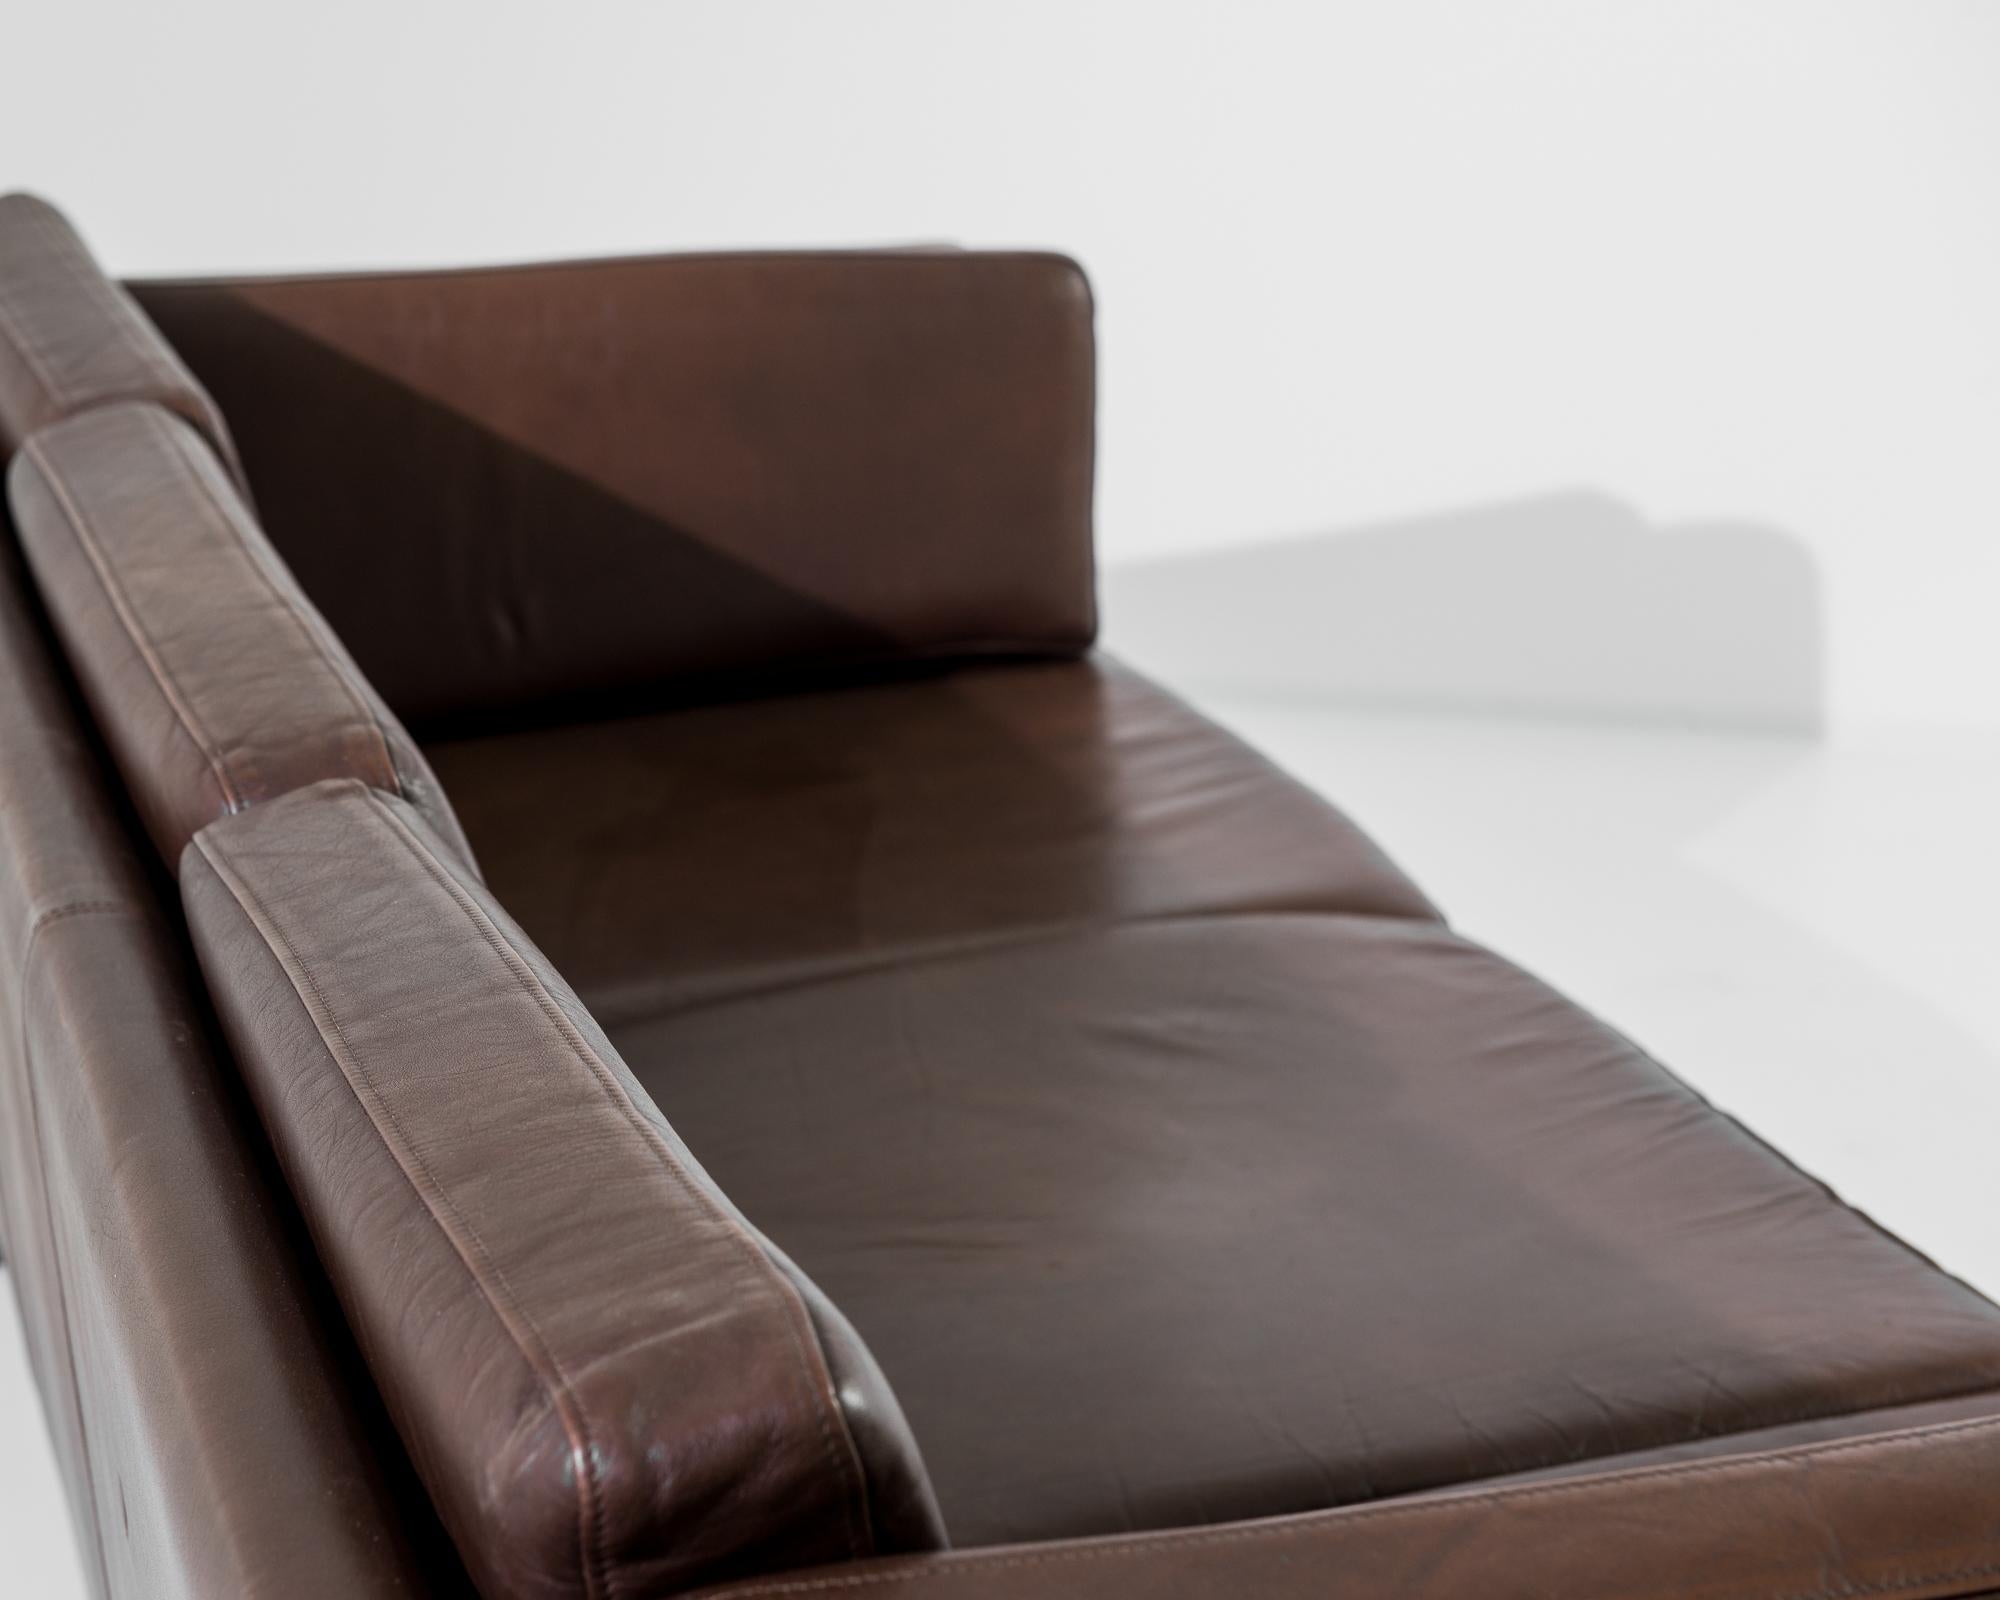 A leather sofa from Denmark, produced circa 1970. A three seat sofa in a rich, chocolate brown leather, standing on four slender square legs. A vintage seat in the Morgensen mold, this piece places a premium on quality of craftsmanship and durable